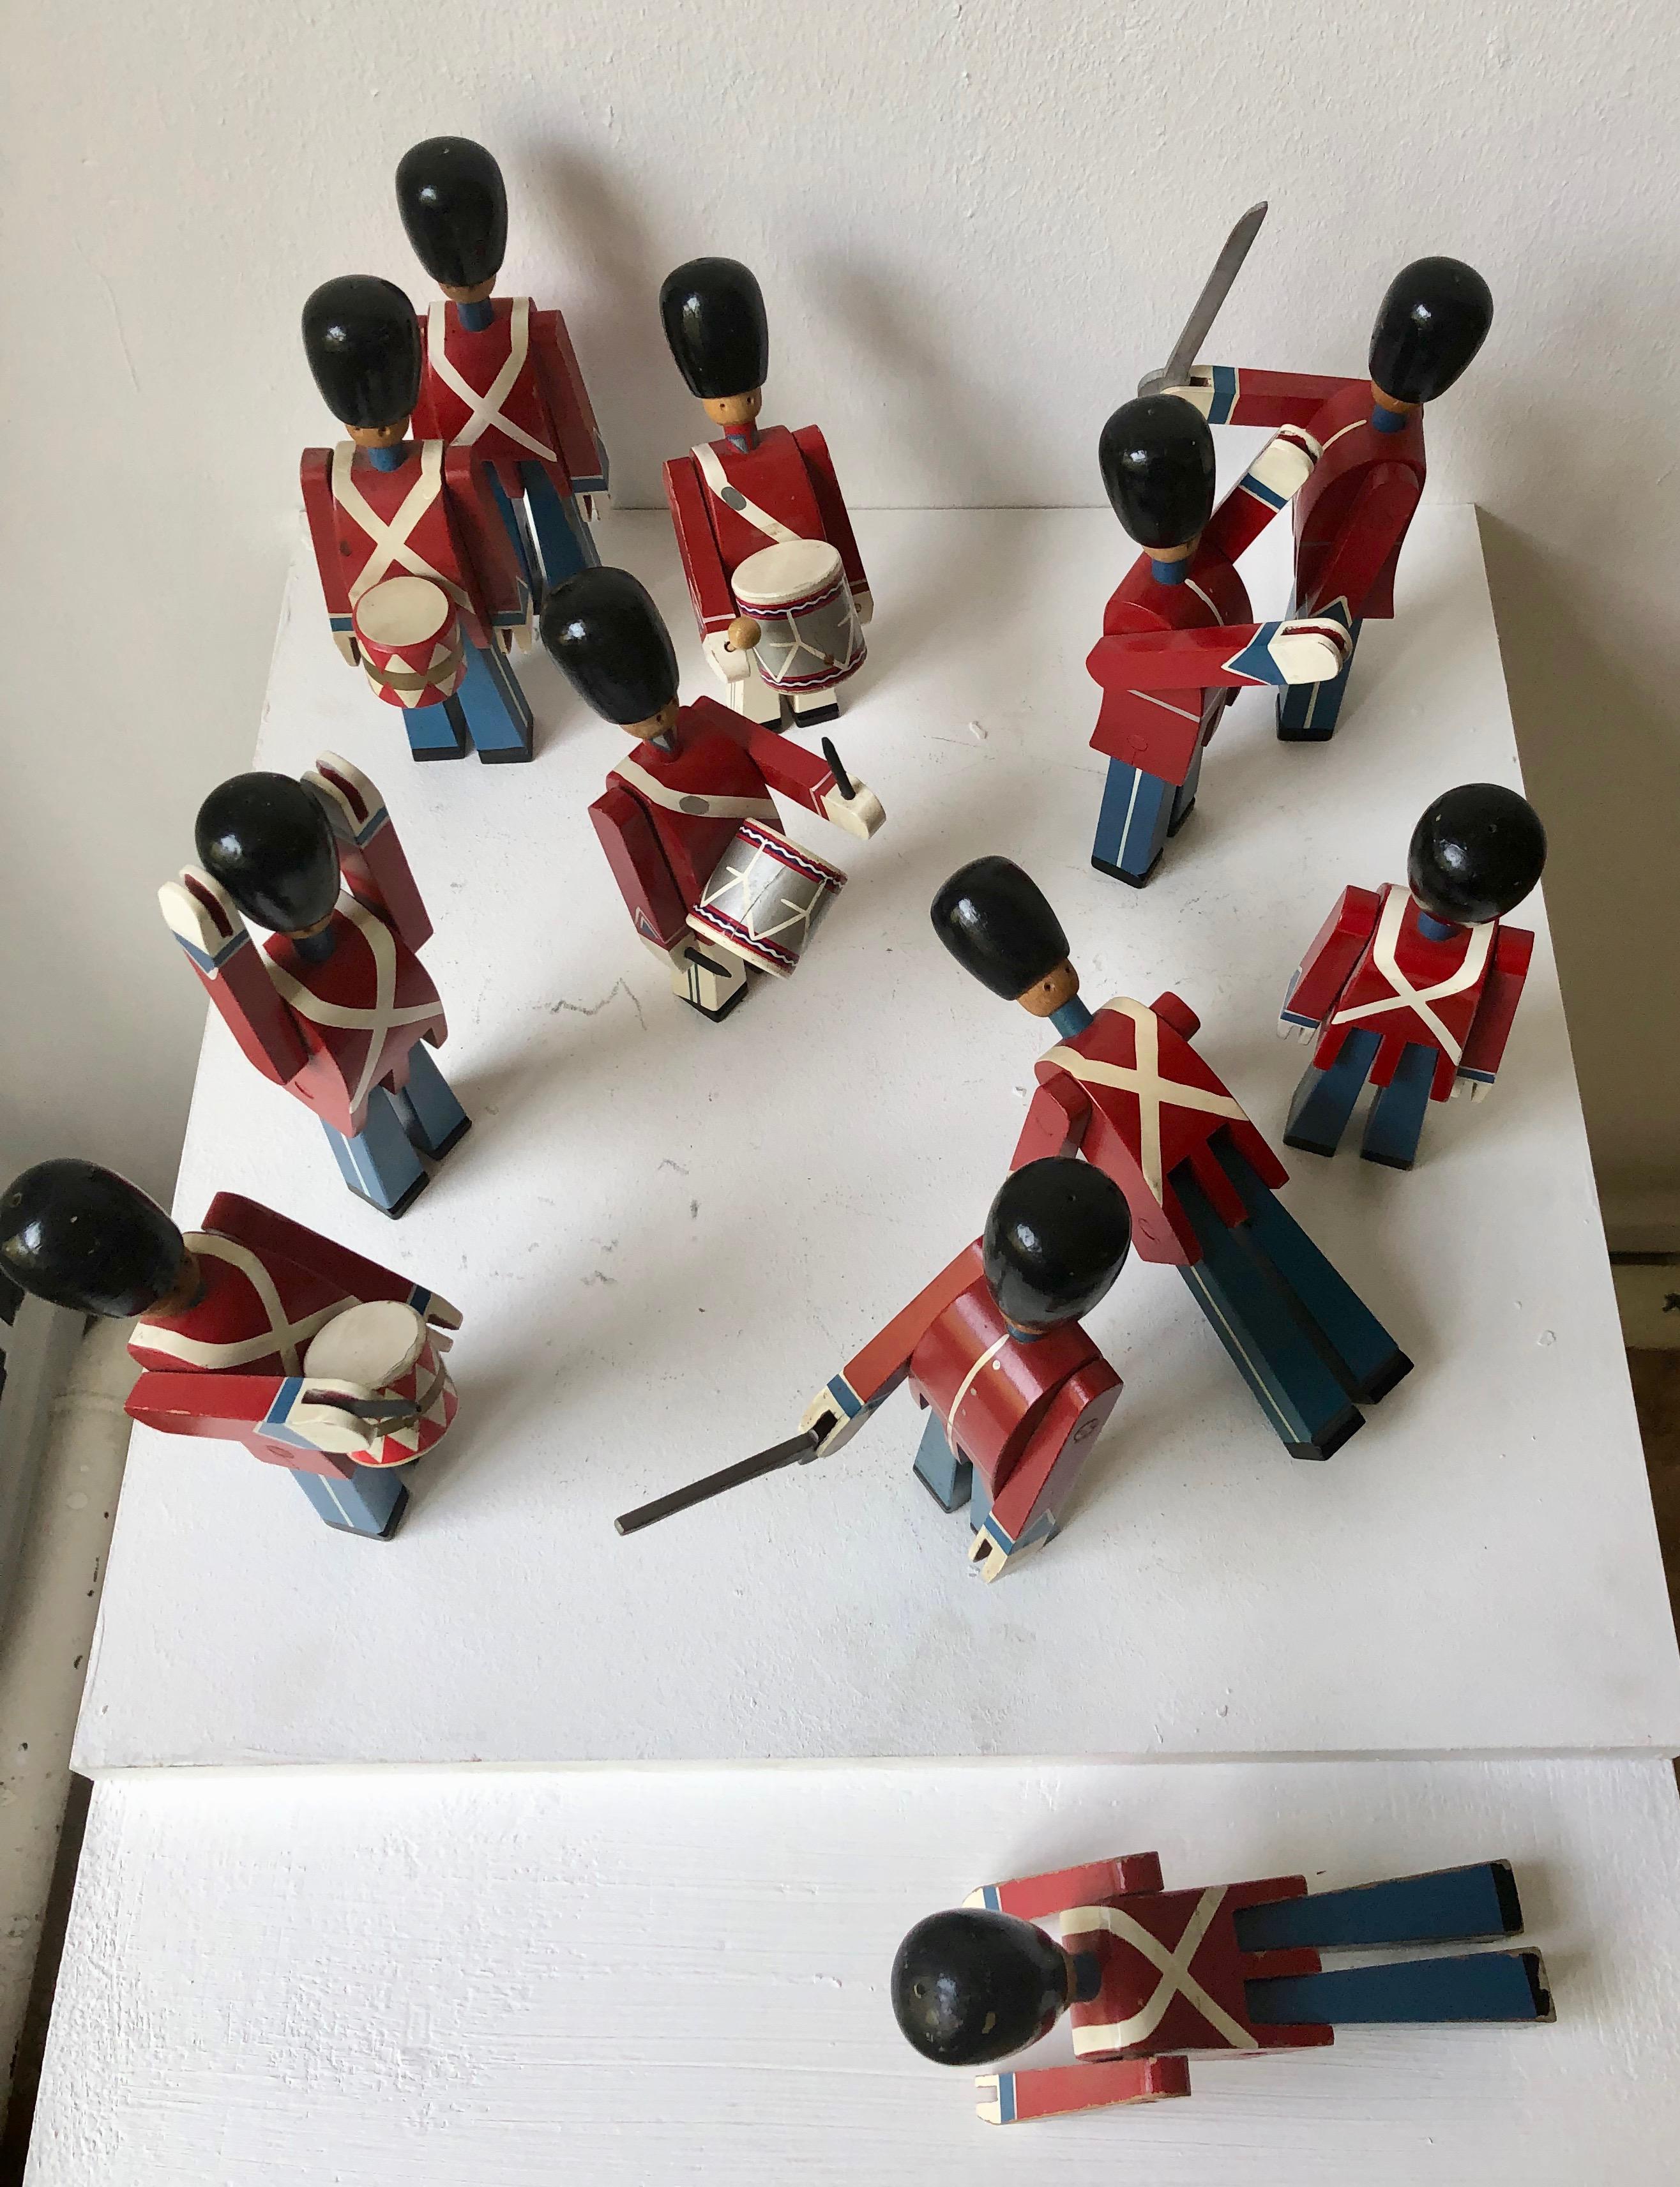 A Set of 12 guardsmen, old production. All marked Kay Bojesen Copyright Denmark. 4 different types of Guardsman:
2 smaller drummers, height 20cm, the others 22 cm, 2 drummers, 3 guardsmen (2 with a sword) 5 guardsmen.
Design from 1942.